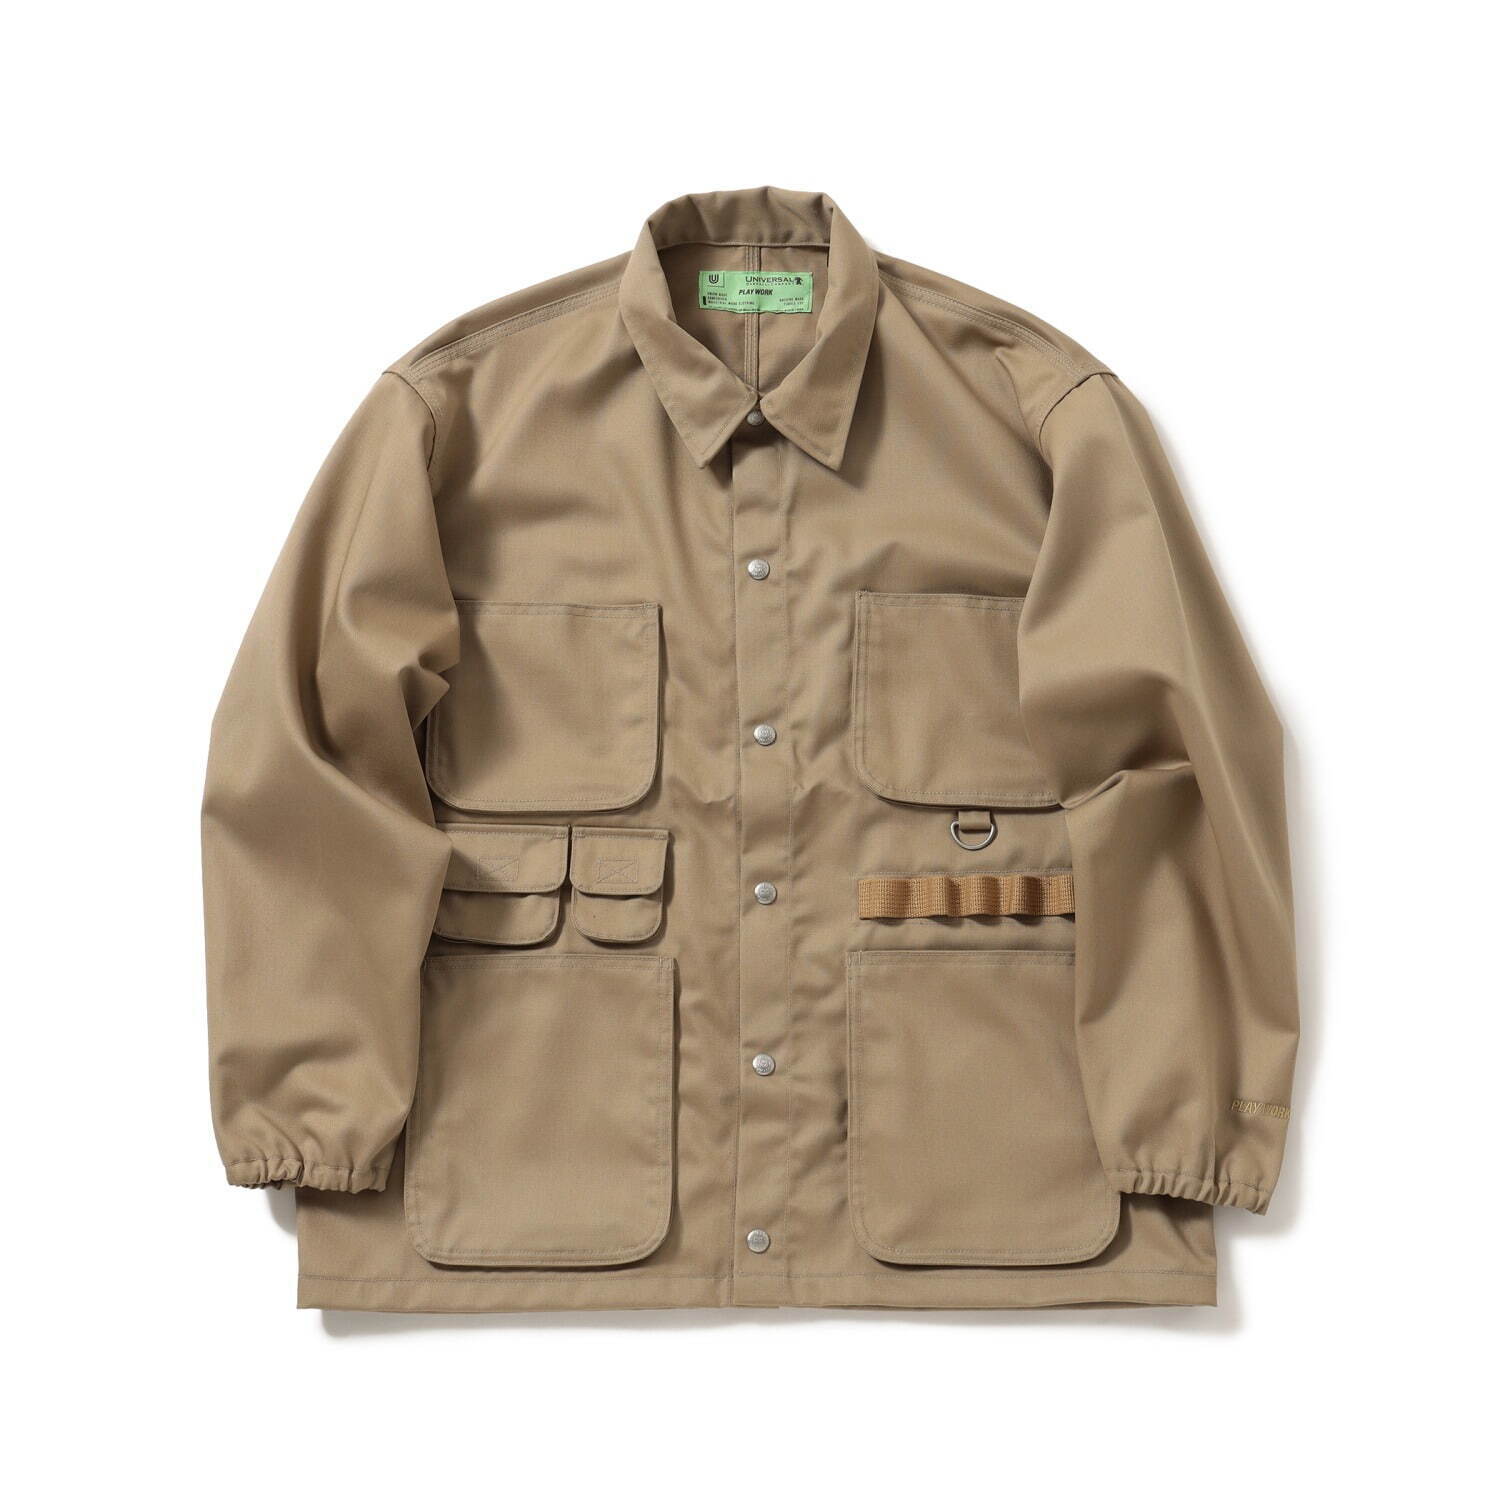 Cover Coach Jacket 19,800円